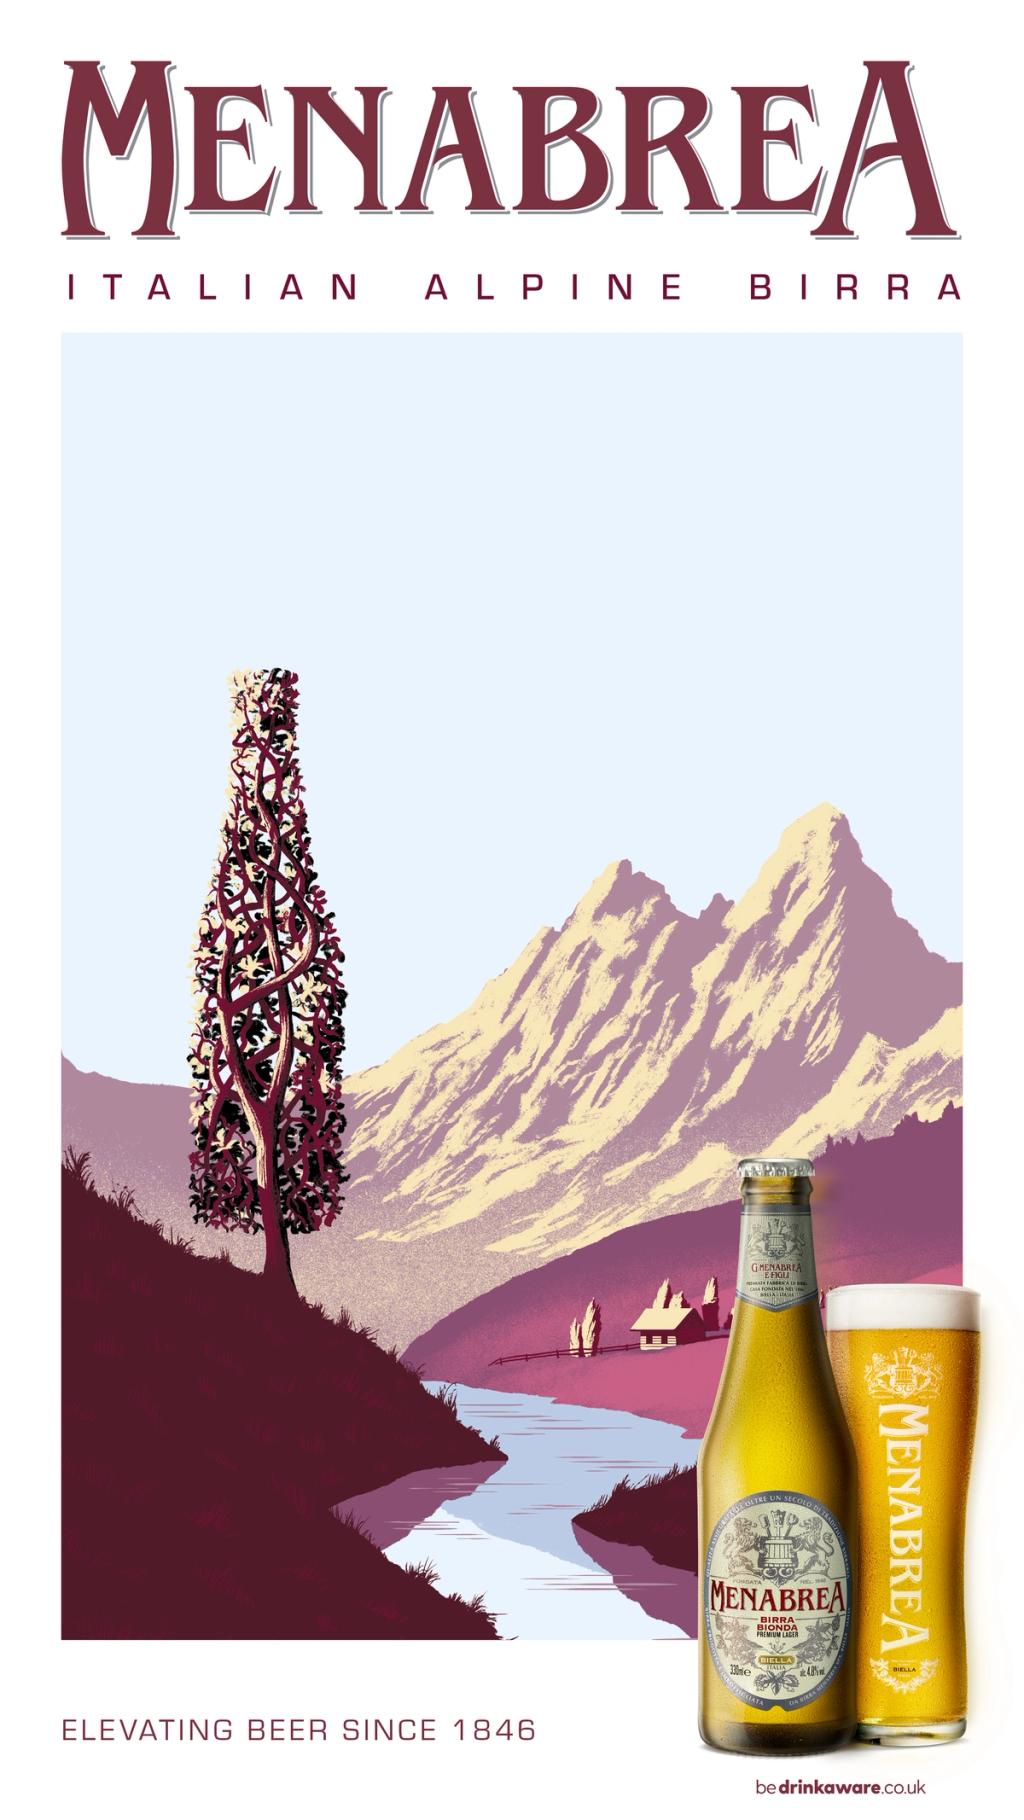 Paul blow illustration of a beer bottle shaped tree next to a stream